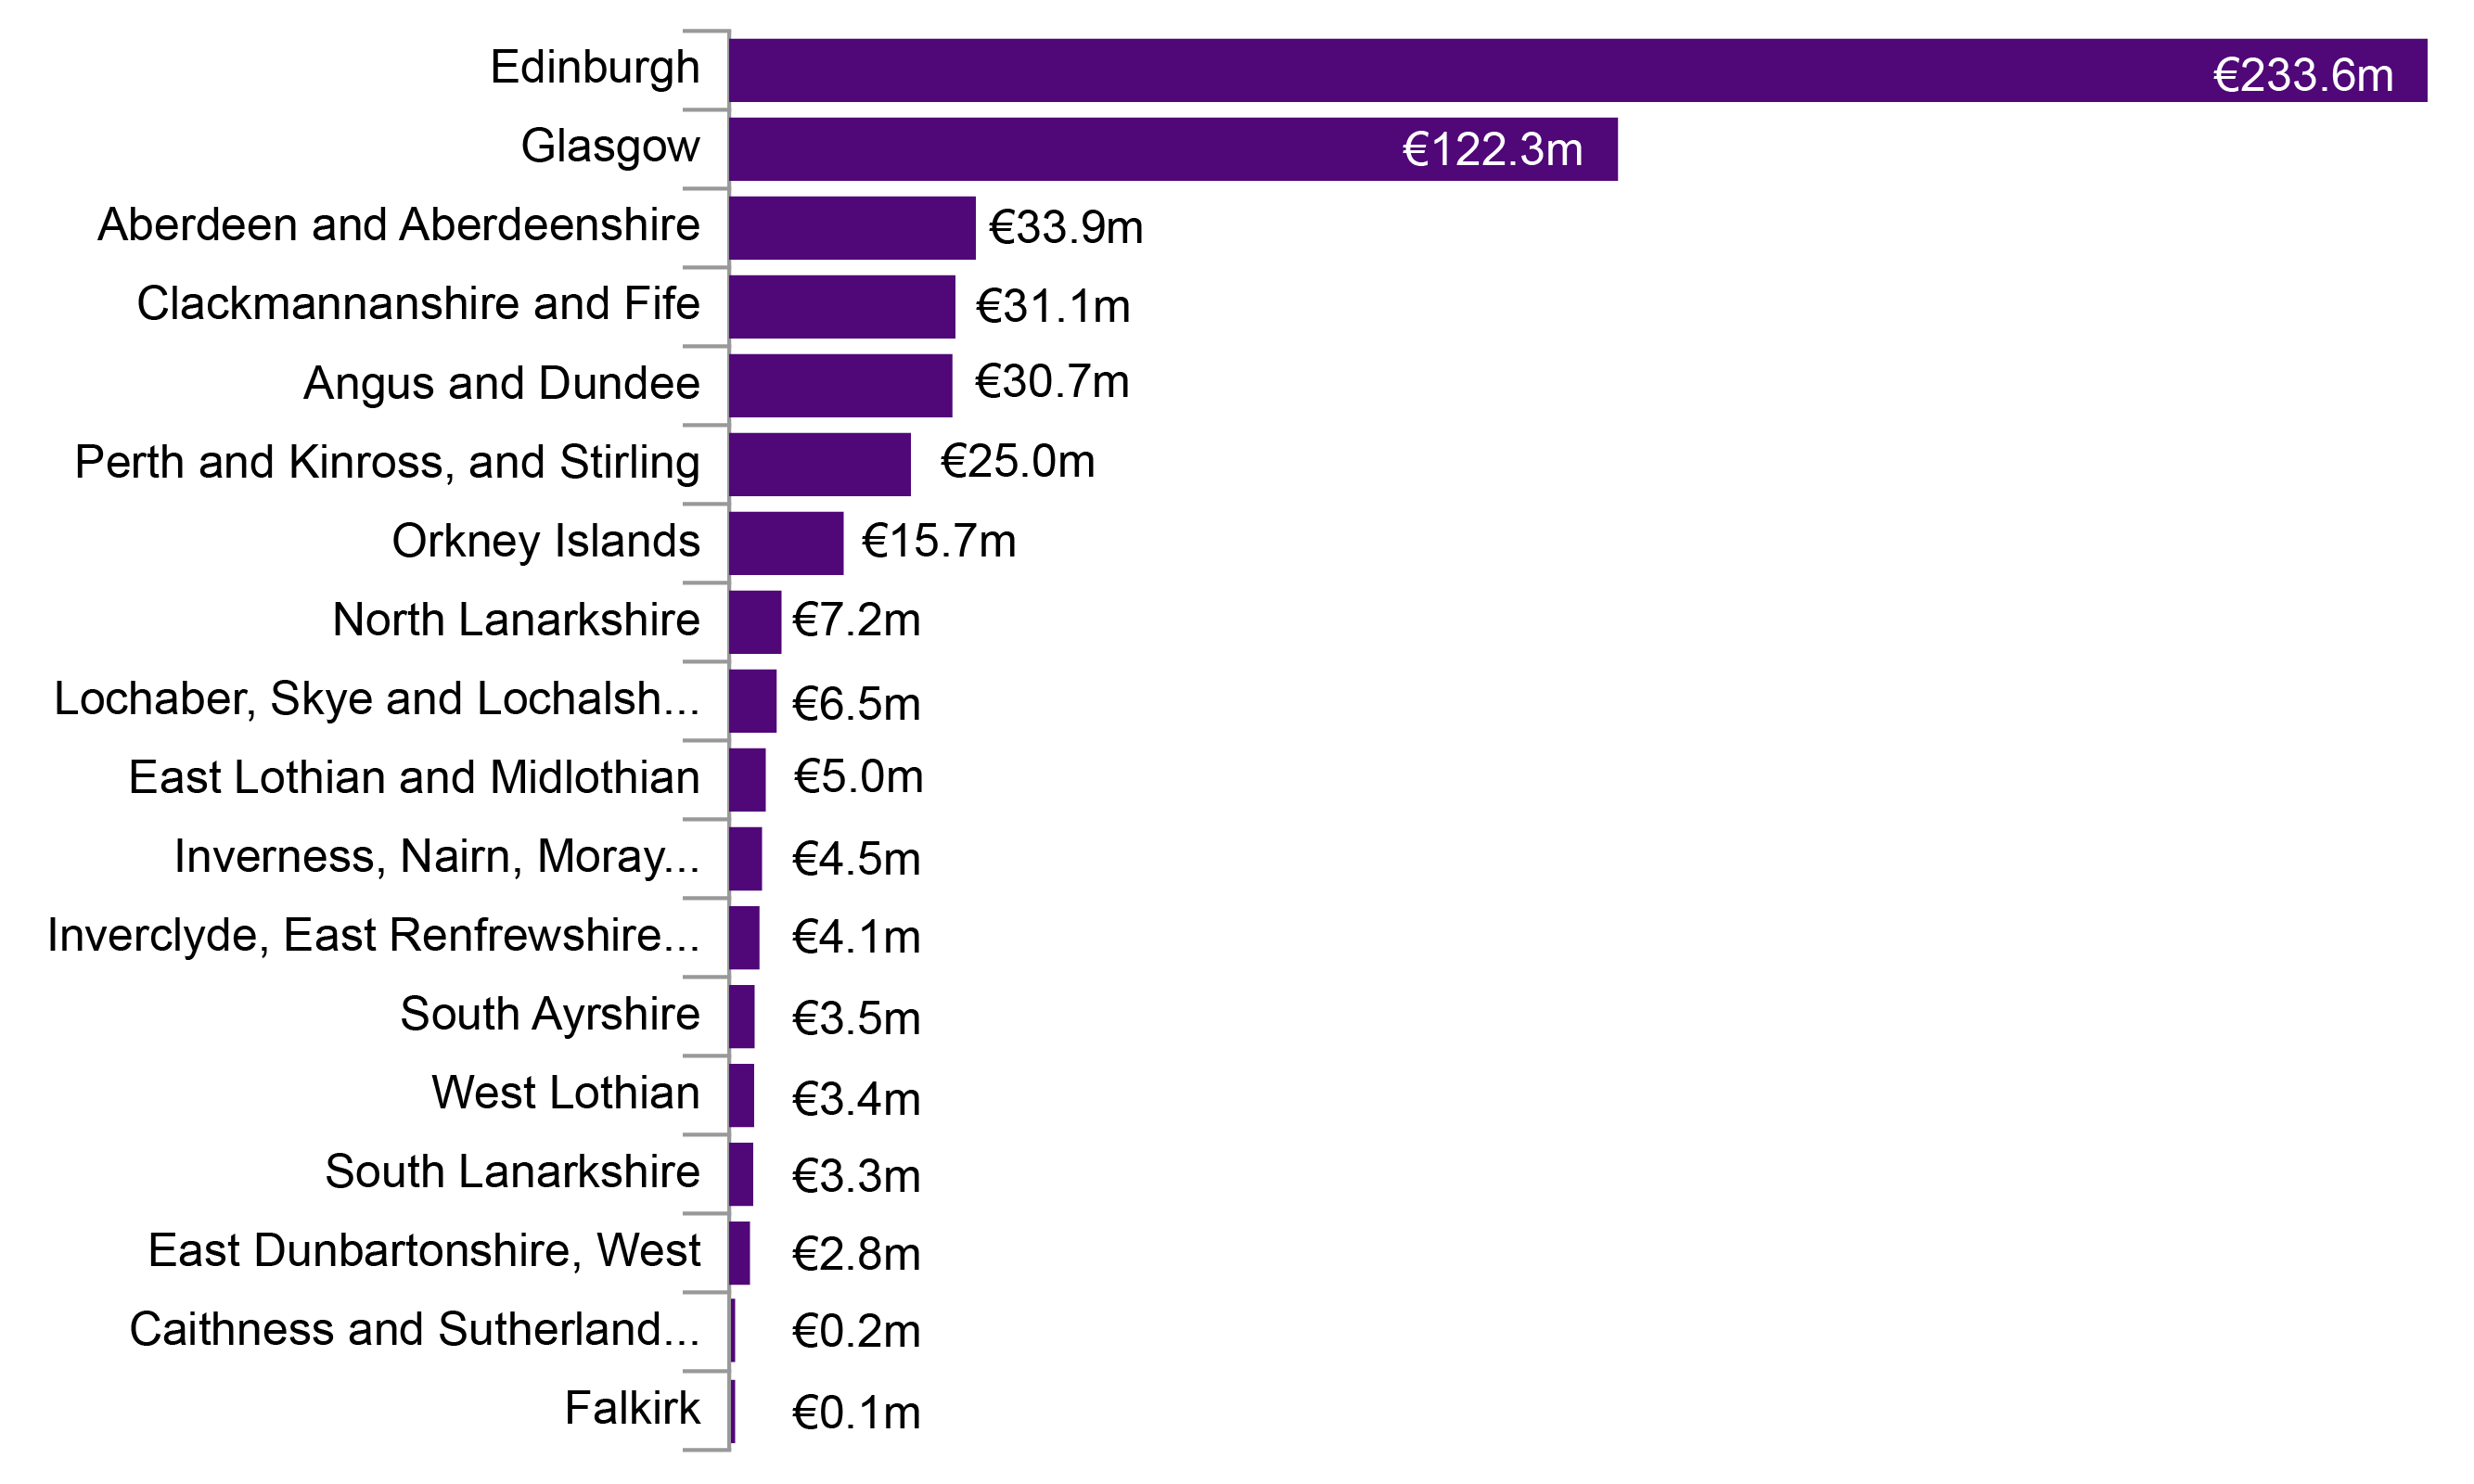 Bar chart showing the value of Horizon 2020 funding by region of Scotland.